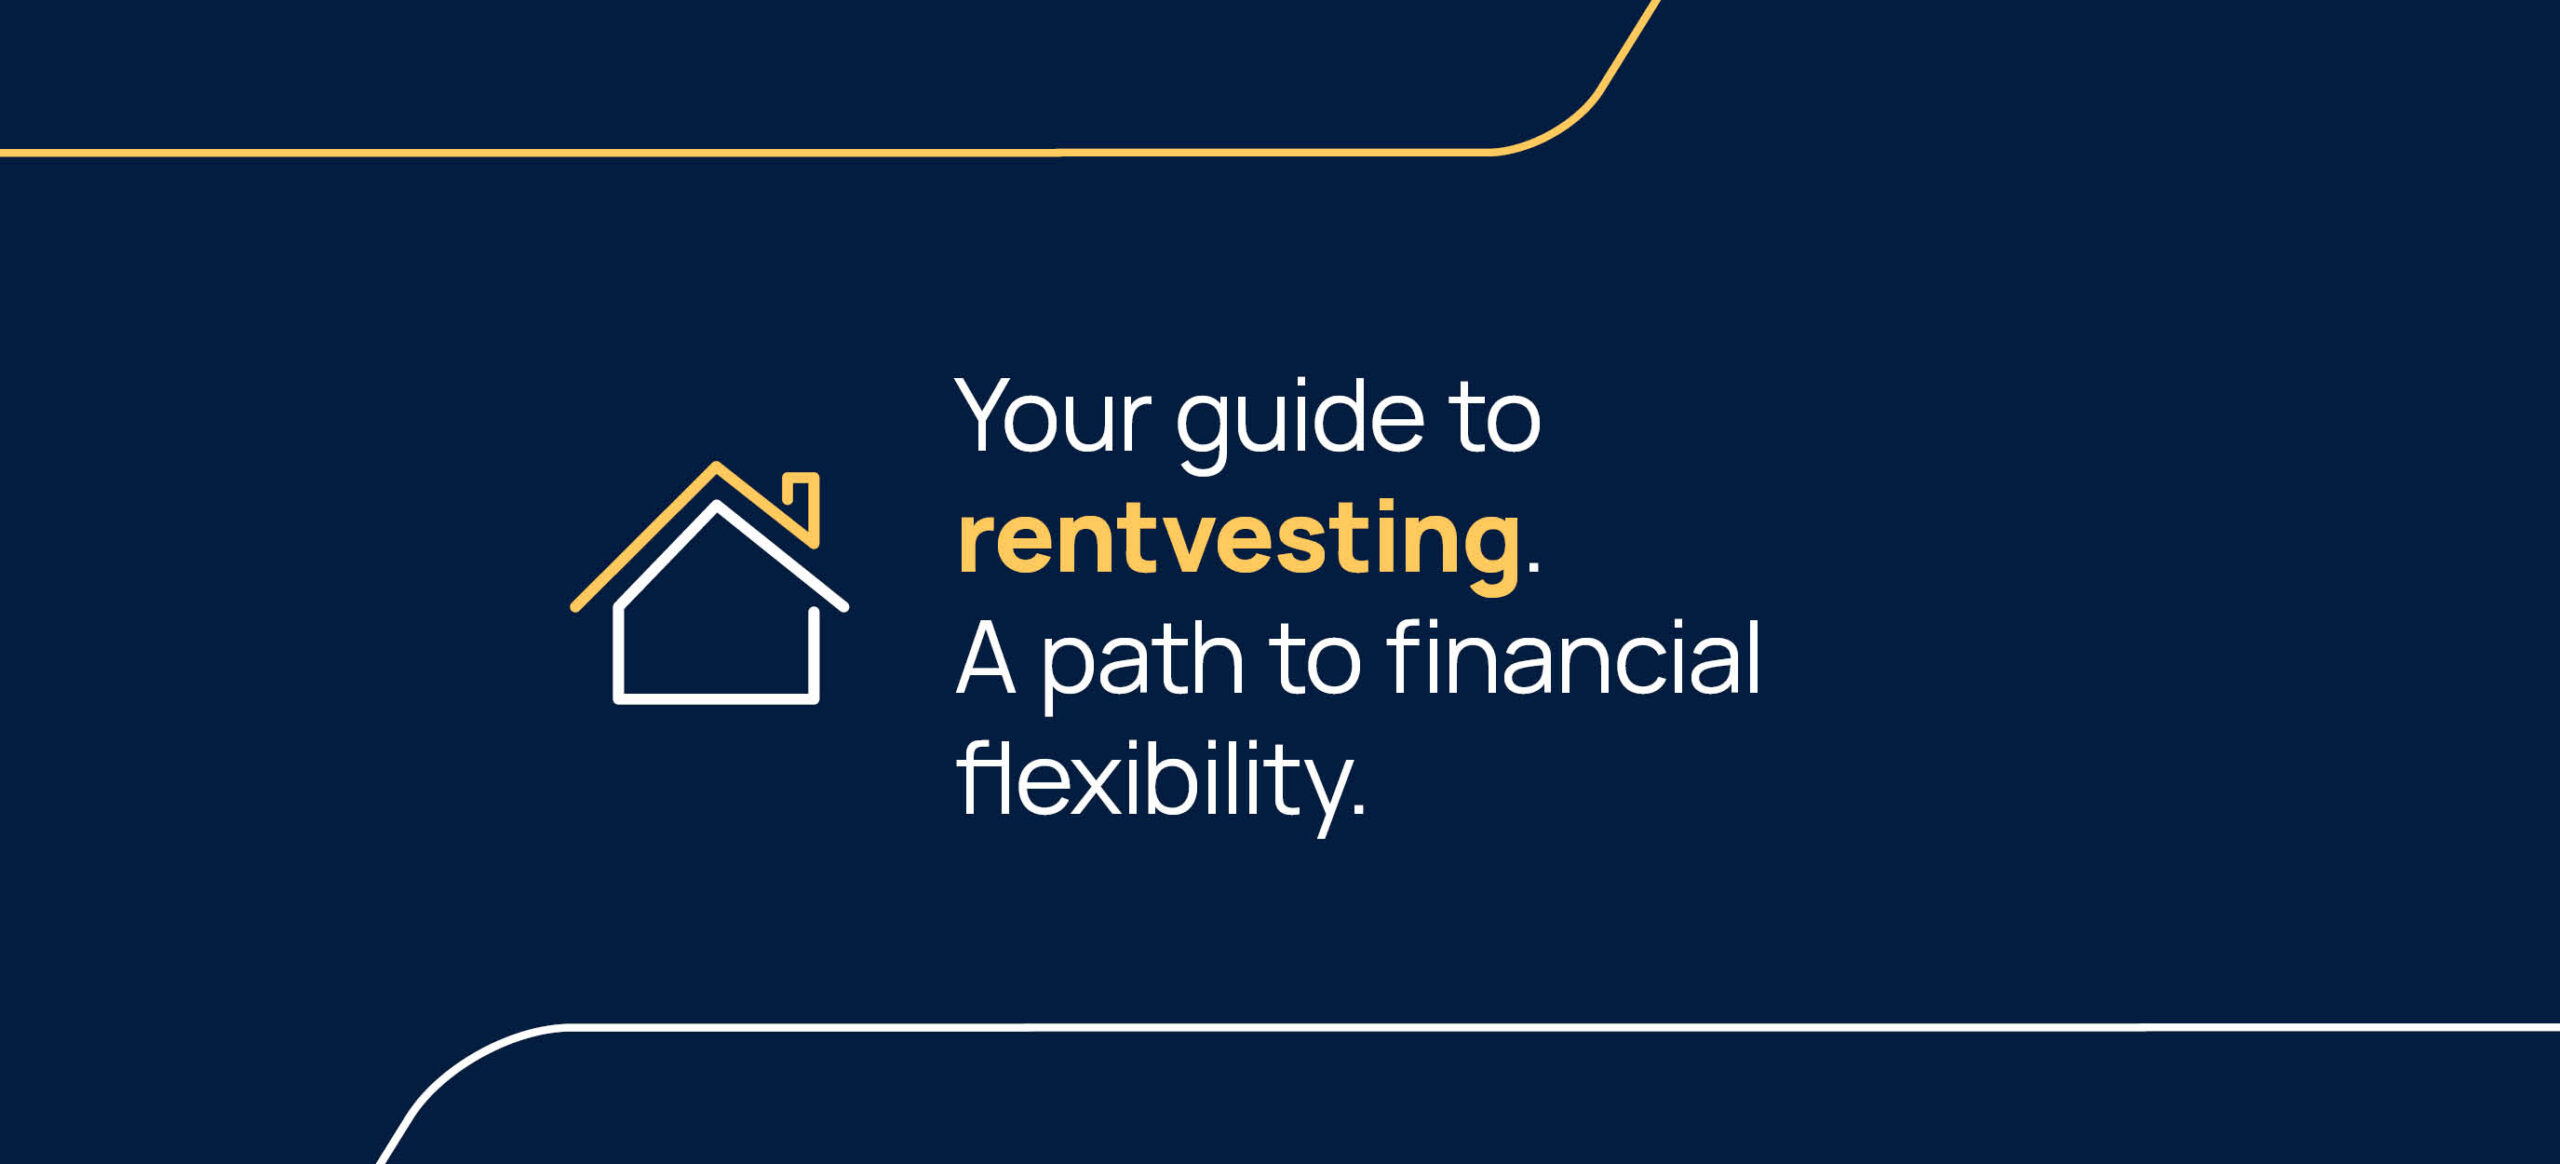 Your guide to rentvesting: A path to financial flexibility.